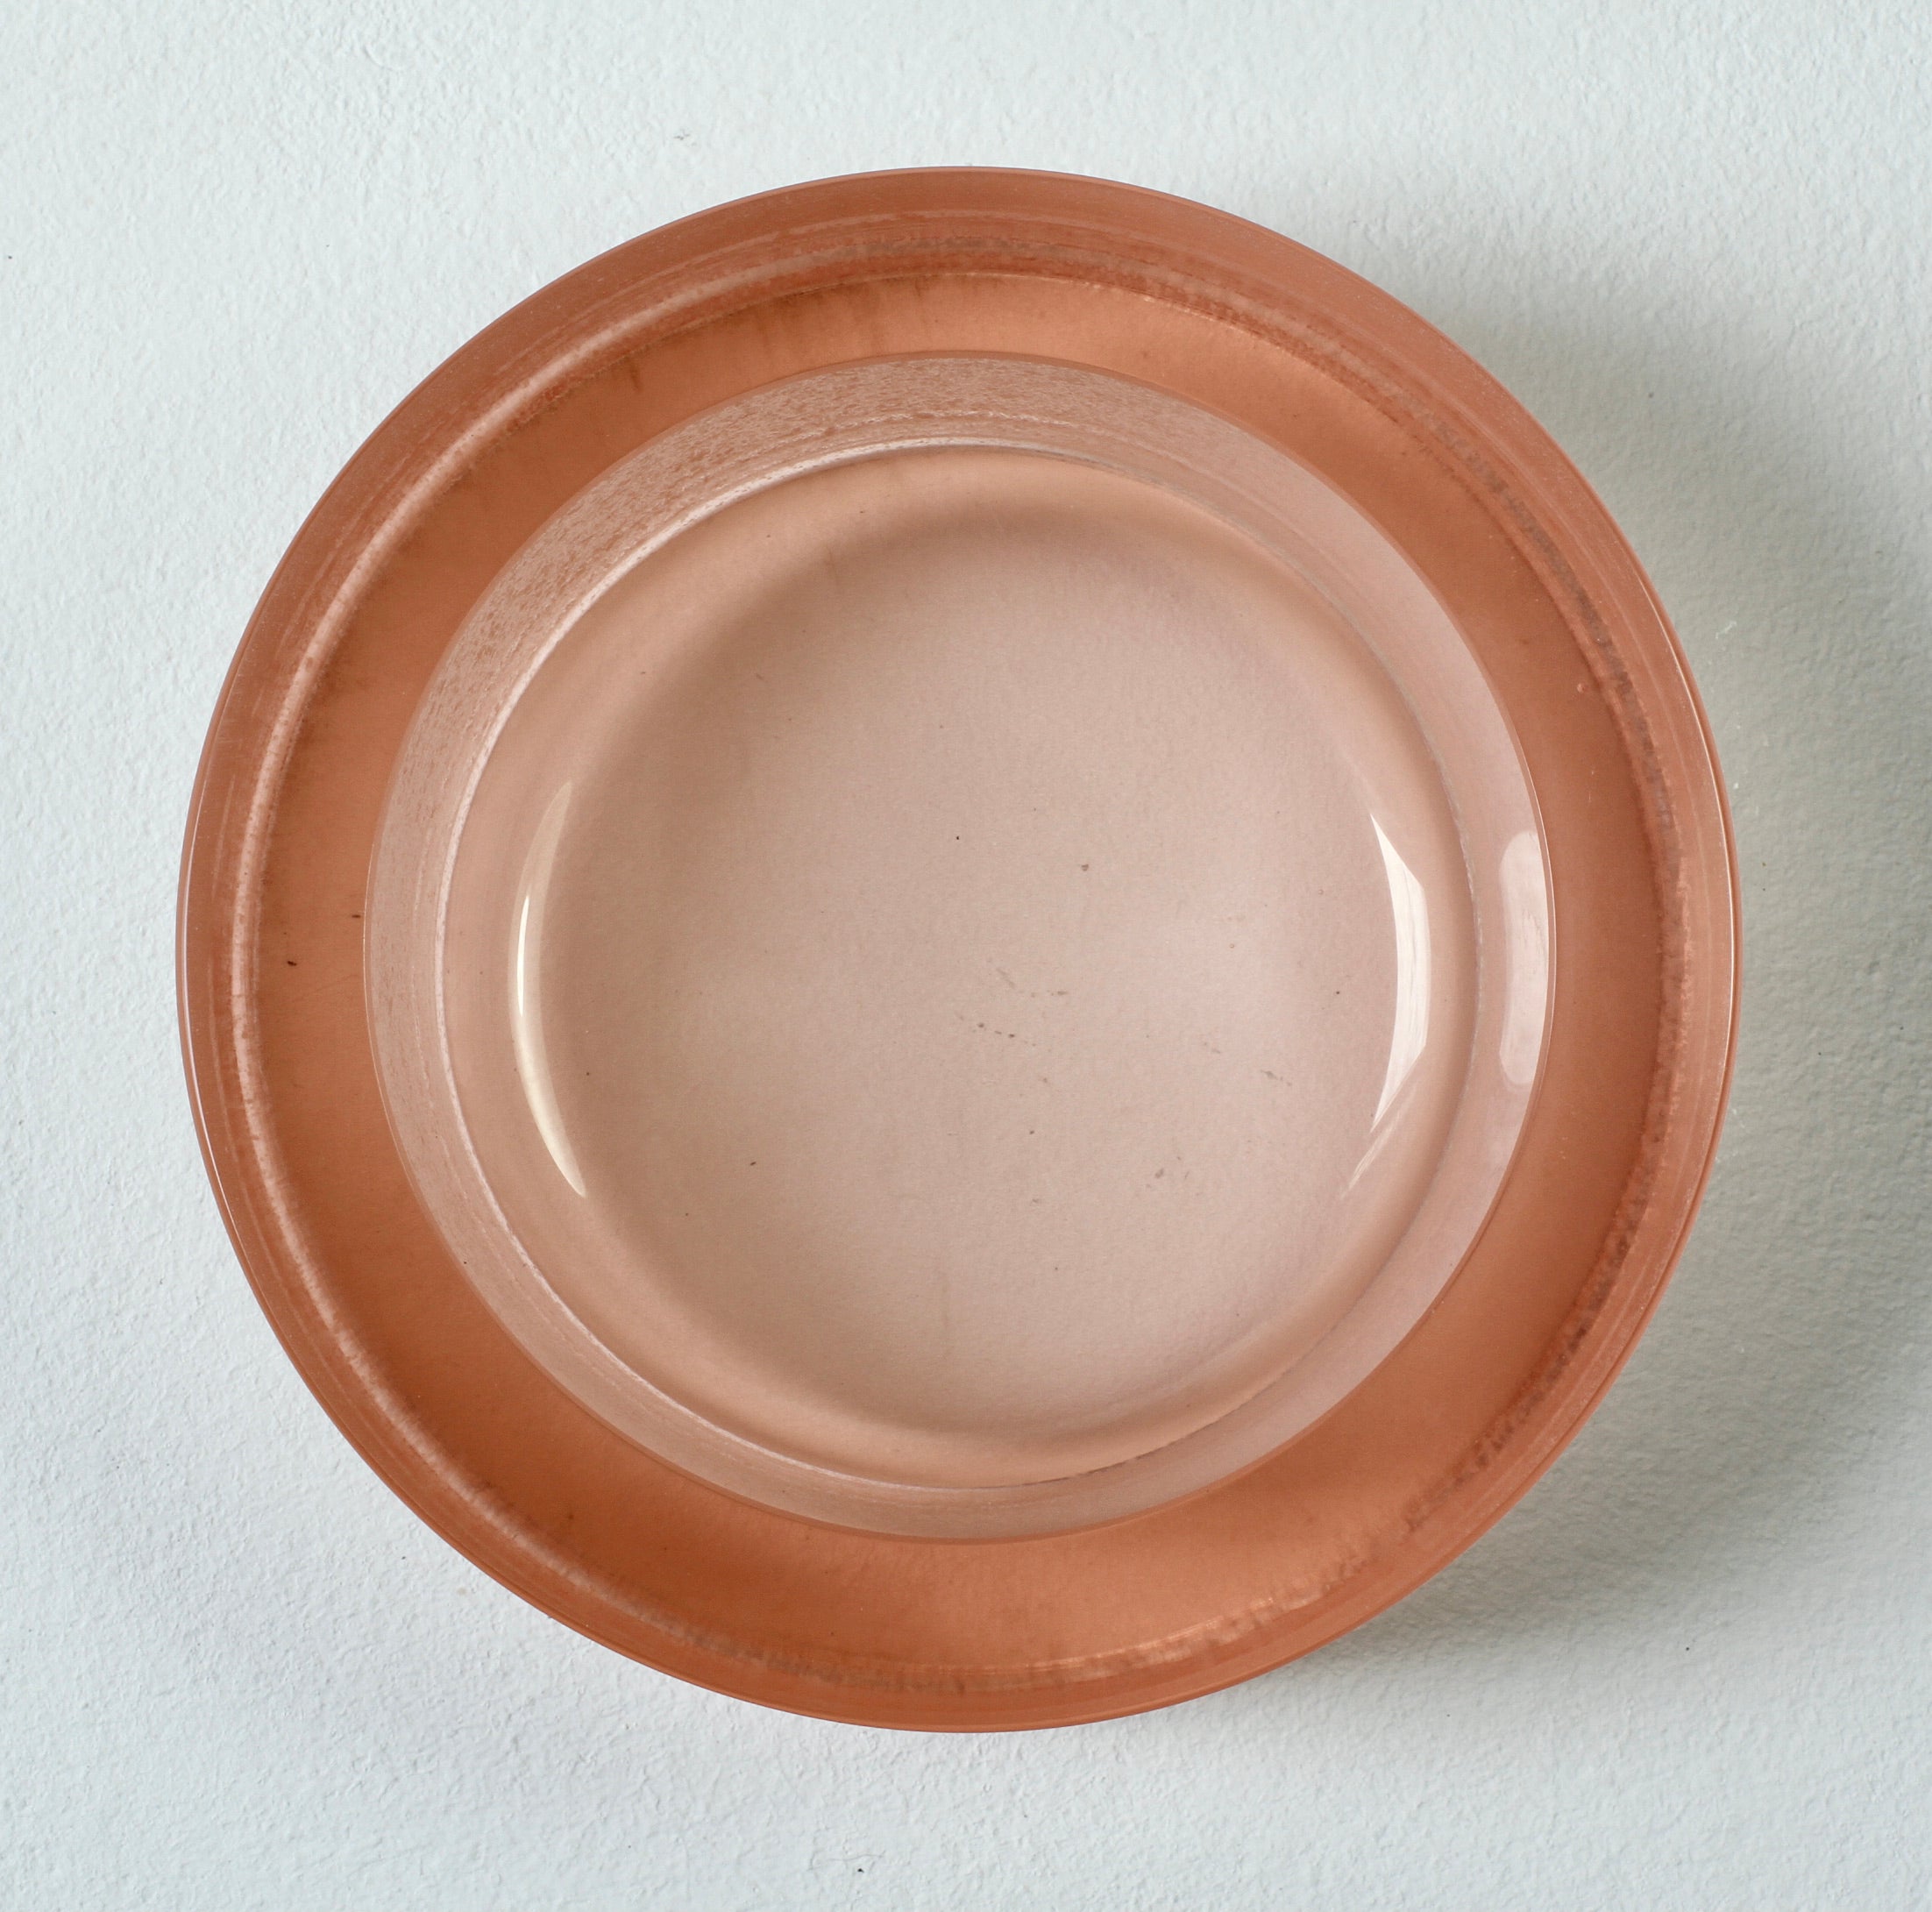 Stunning large soft pink 'a Scavo' white colored / coloured round circular glass bowl, dish or ashtray by Seguso Vetri d'Arte Murano, Italy, circa 1980s. Elegant in form - rather minimalist but with the obvious sign of quality with the thick and